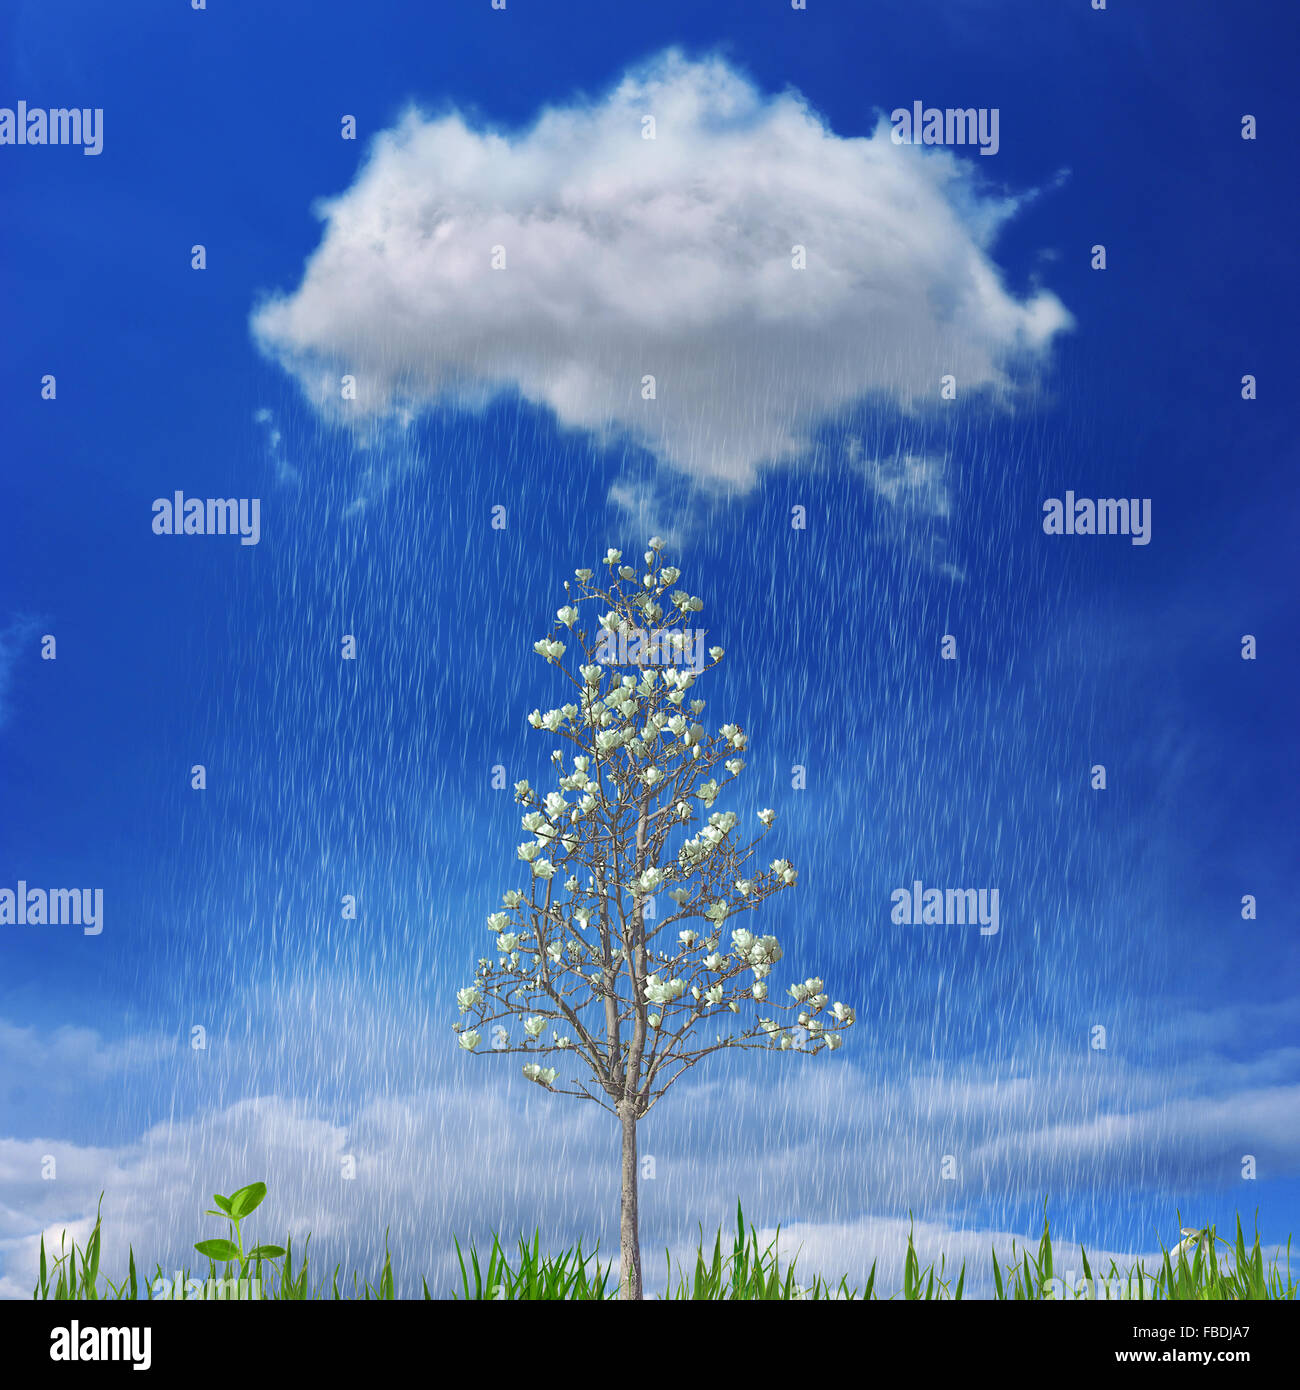 Growth and success concept in the form of a small blooming tree and green grass underneath a rain cloud Stock Photo